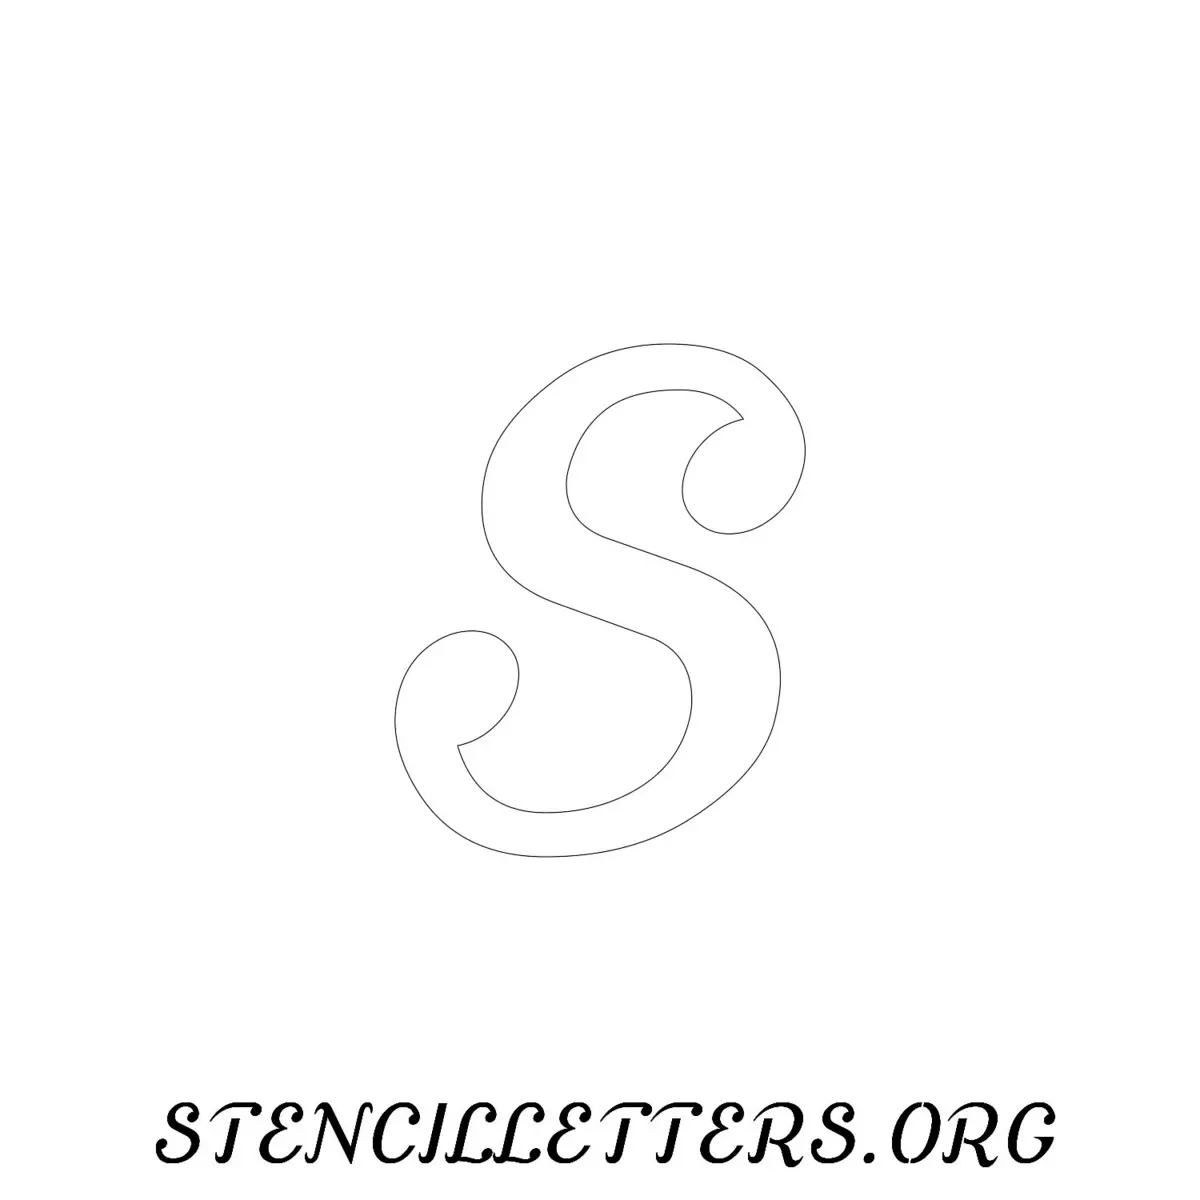 4 Inch Free Printable Individual 144 Cursive Lowercase Letter Stencils